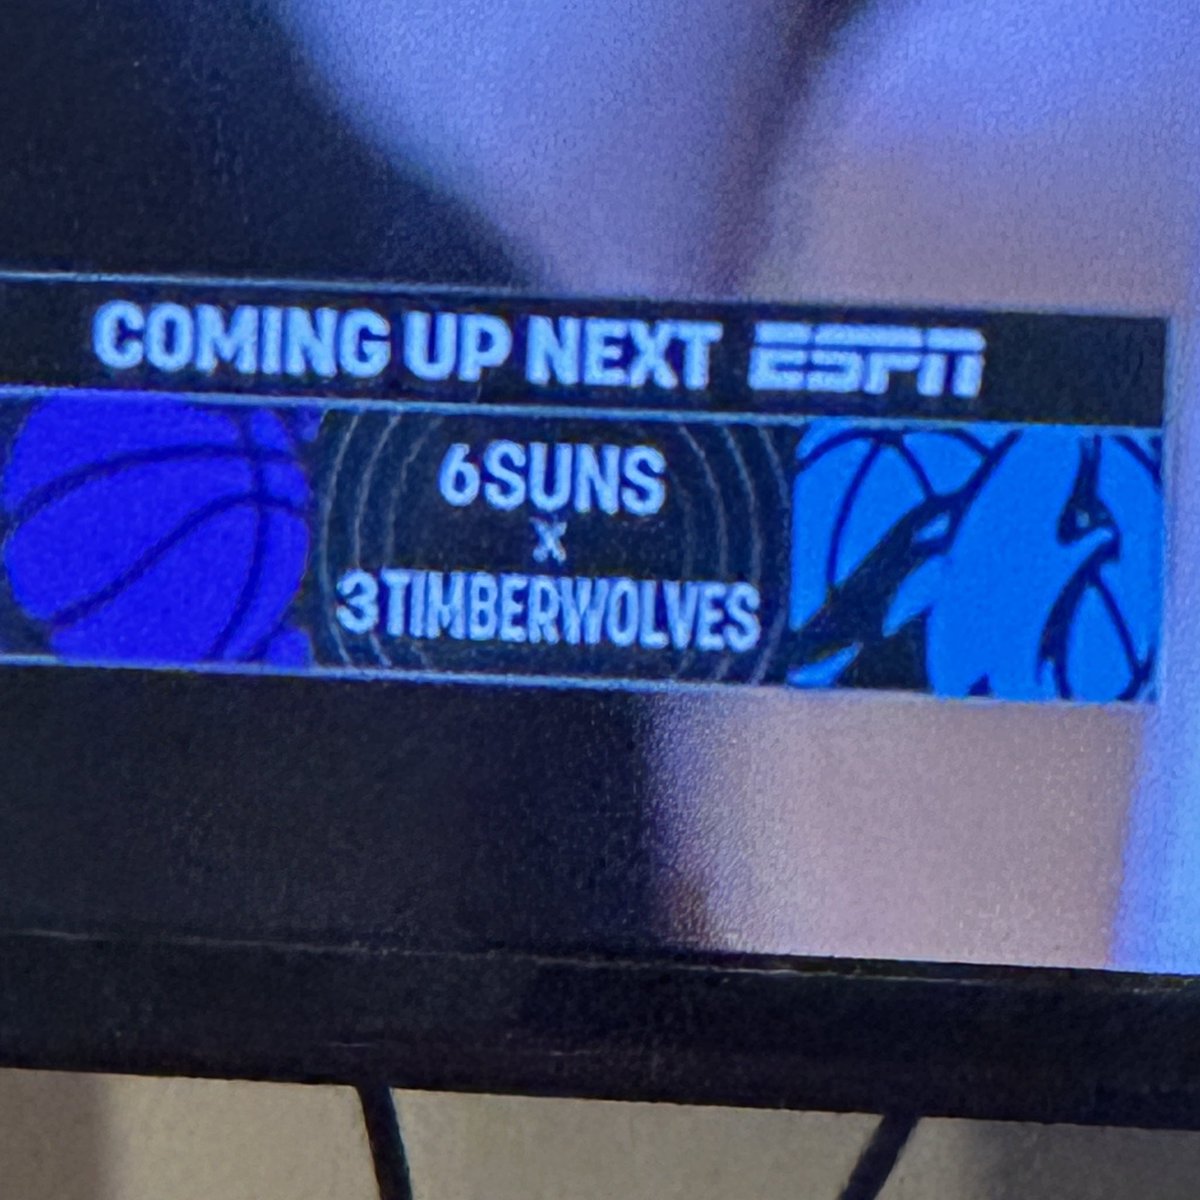 I’m not good at math. What do you get when you multiply 6 suns by 3 timberwolves?